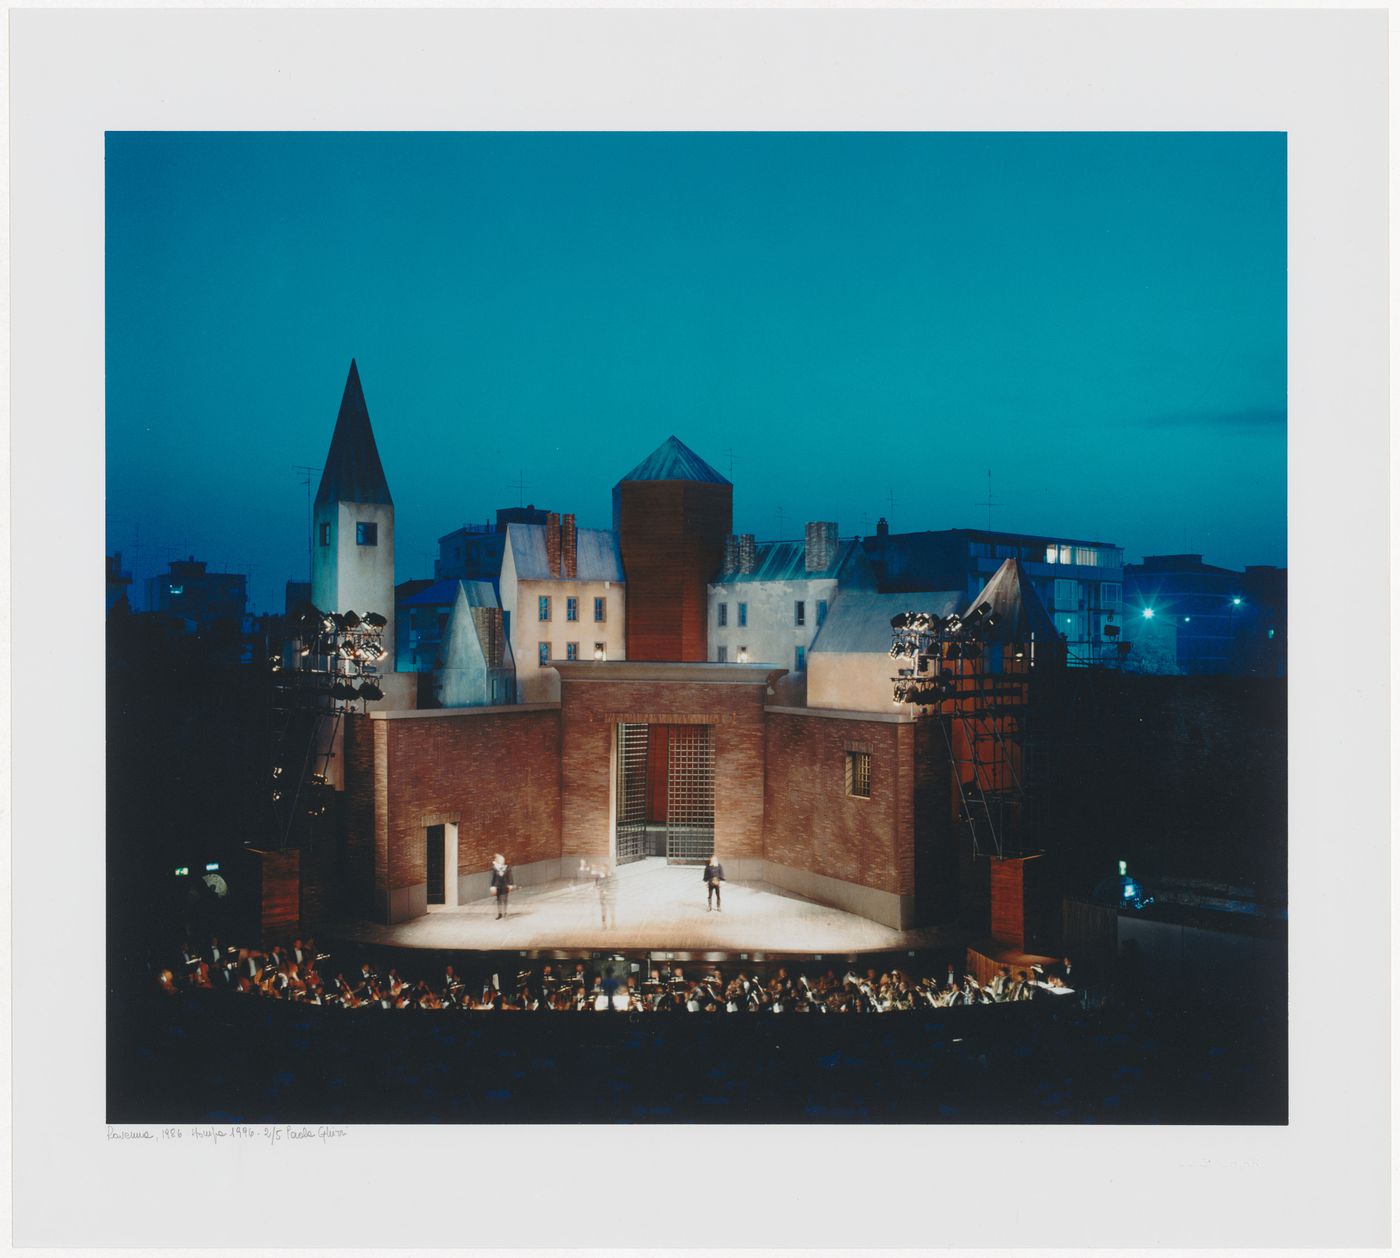 Stage set for Lucia di Lammermoor, Ravenna, 1986, seen at night during a performance